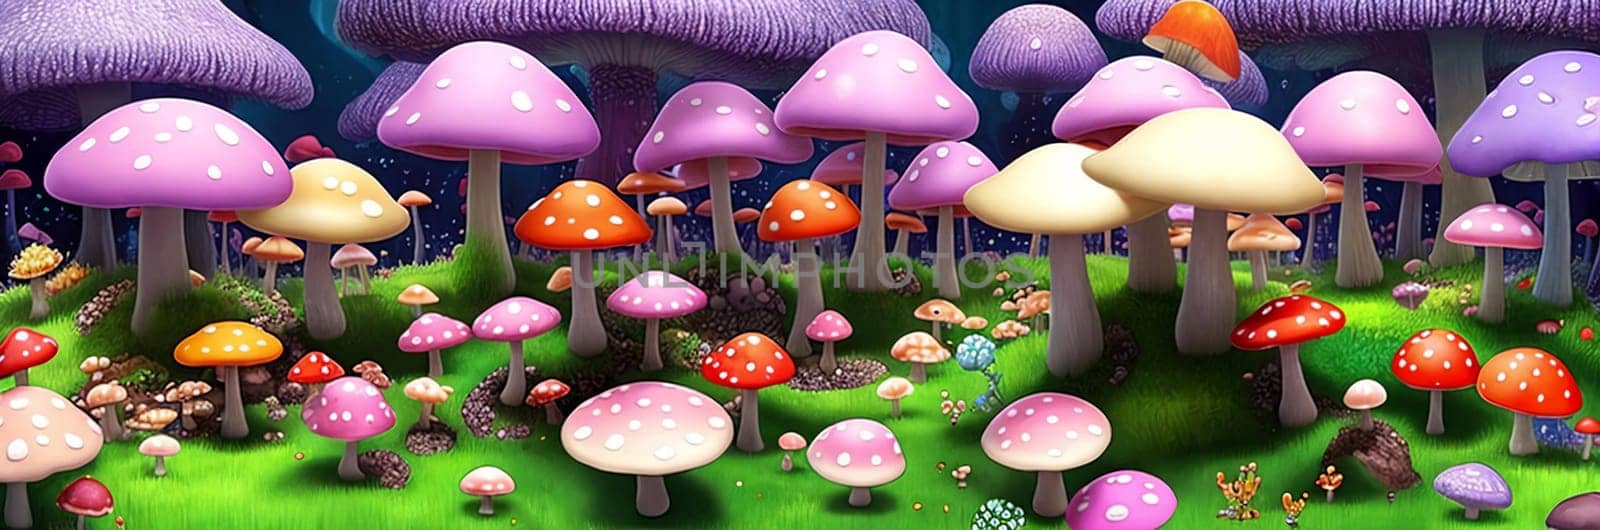 Immerse in a whimsical vibrant mushroom forest Oversized fungi of varied hues paint a surreal, otherworldly scene